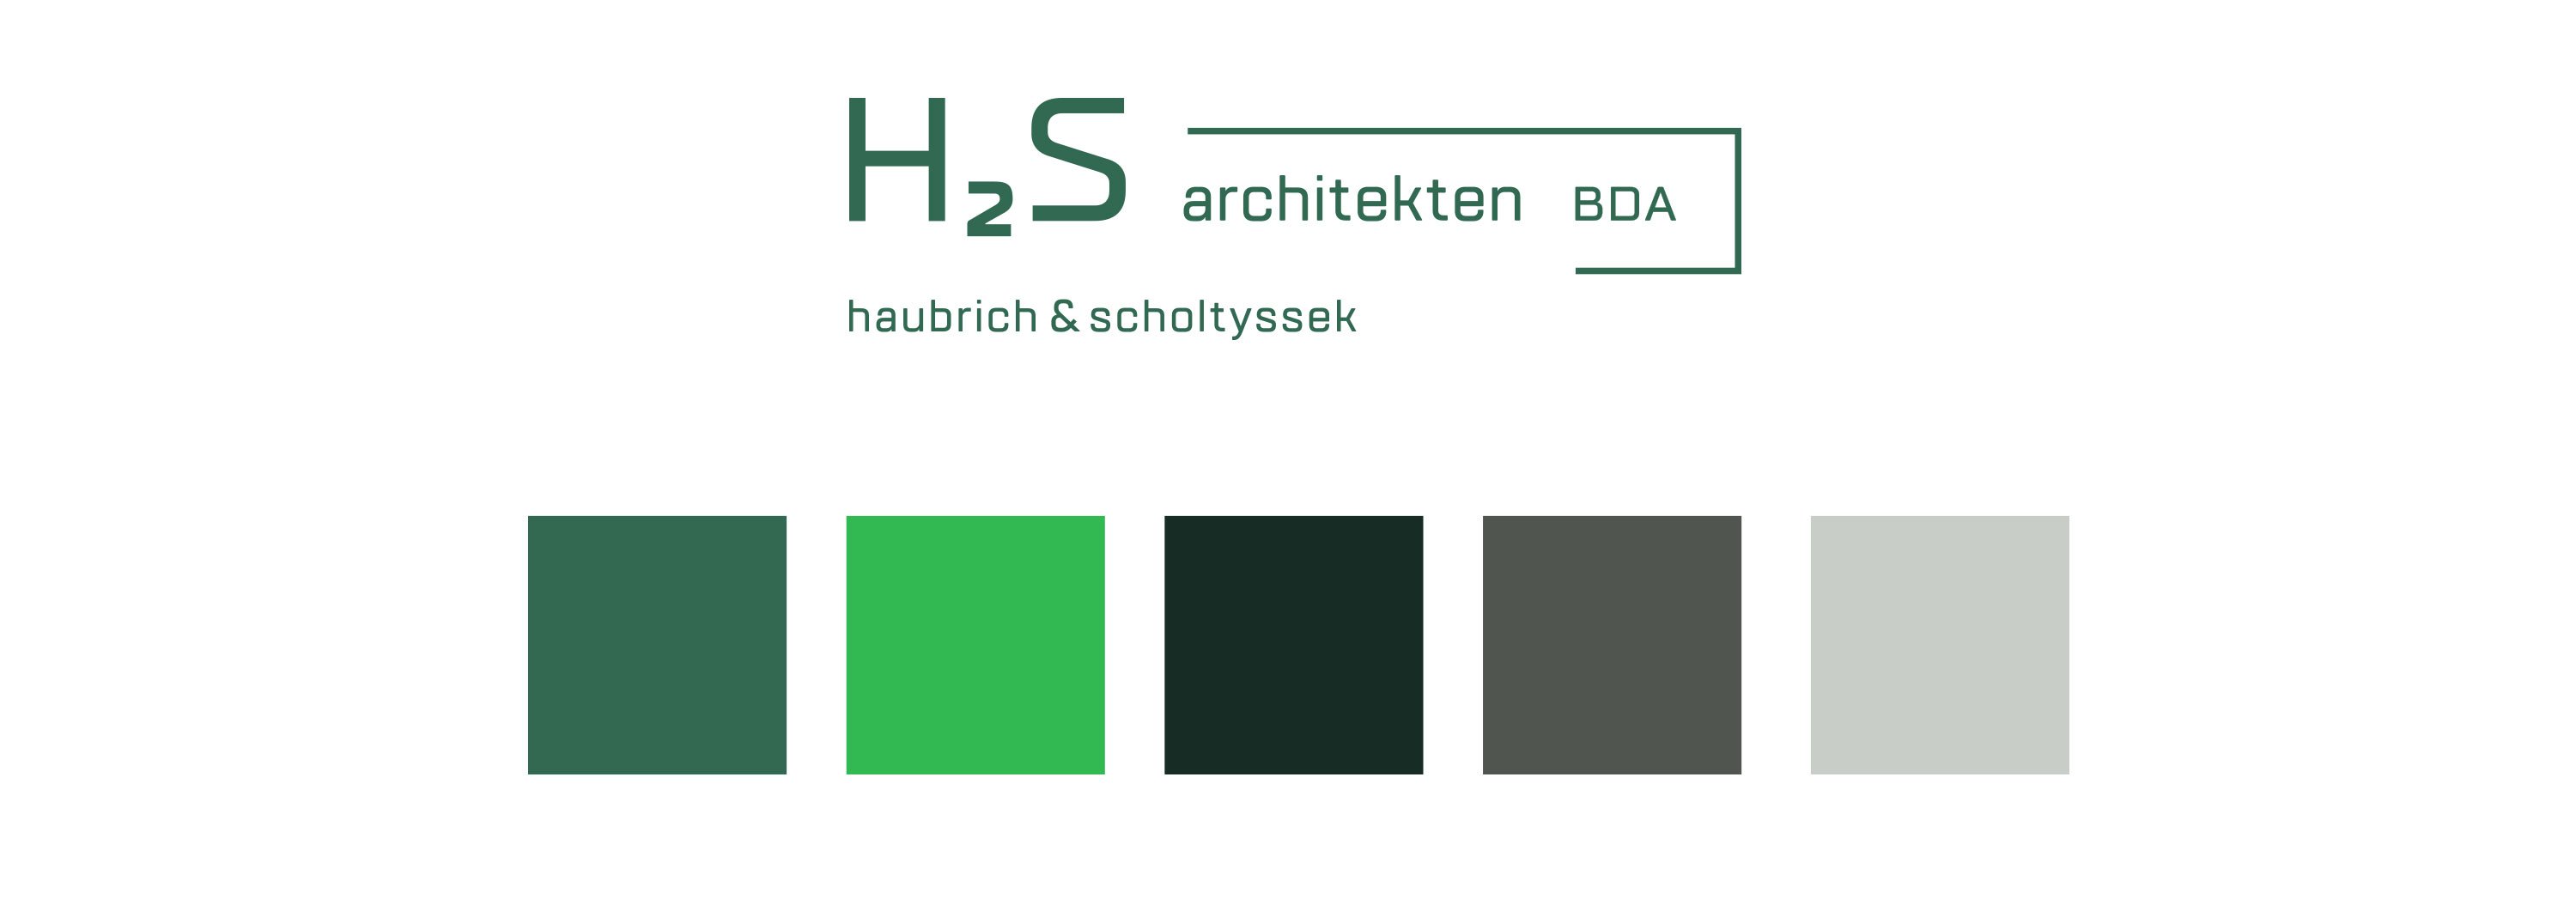 corporate colours for h2s architects: DIE NEUDENKER, Corporate Design Agency Darmstadt